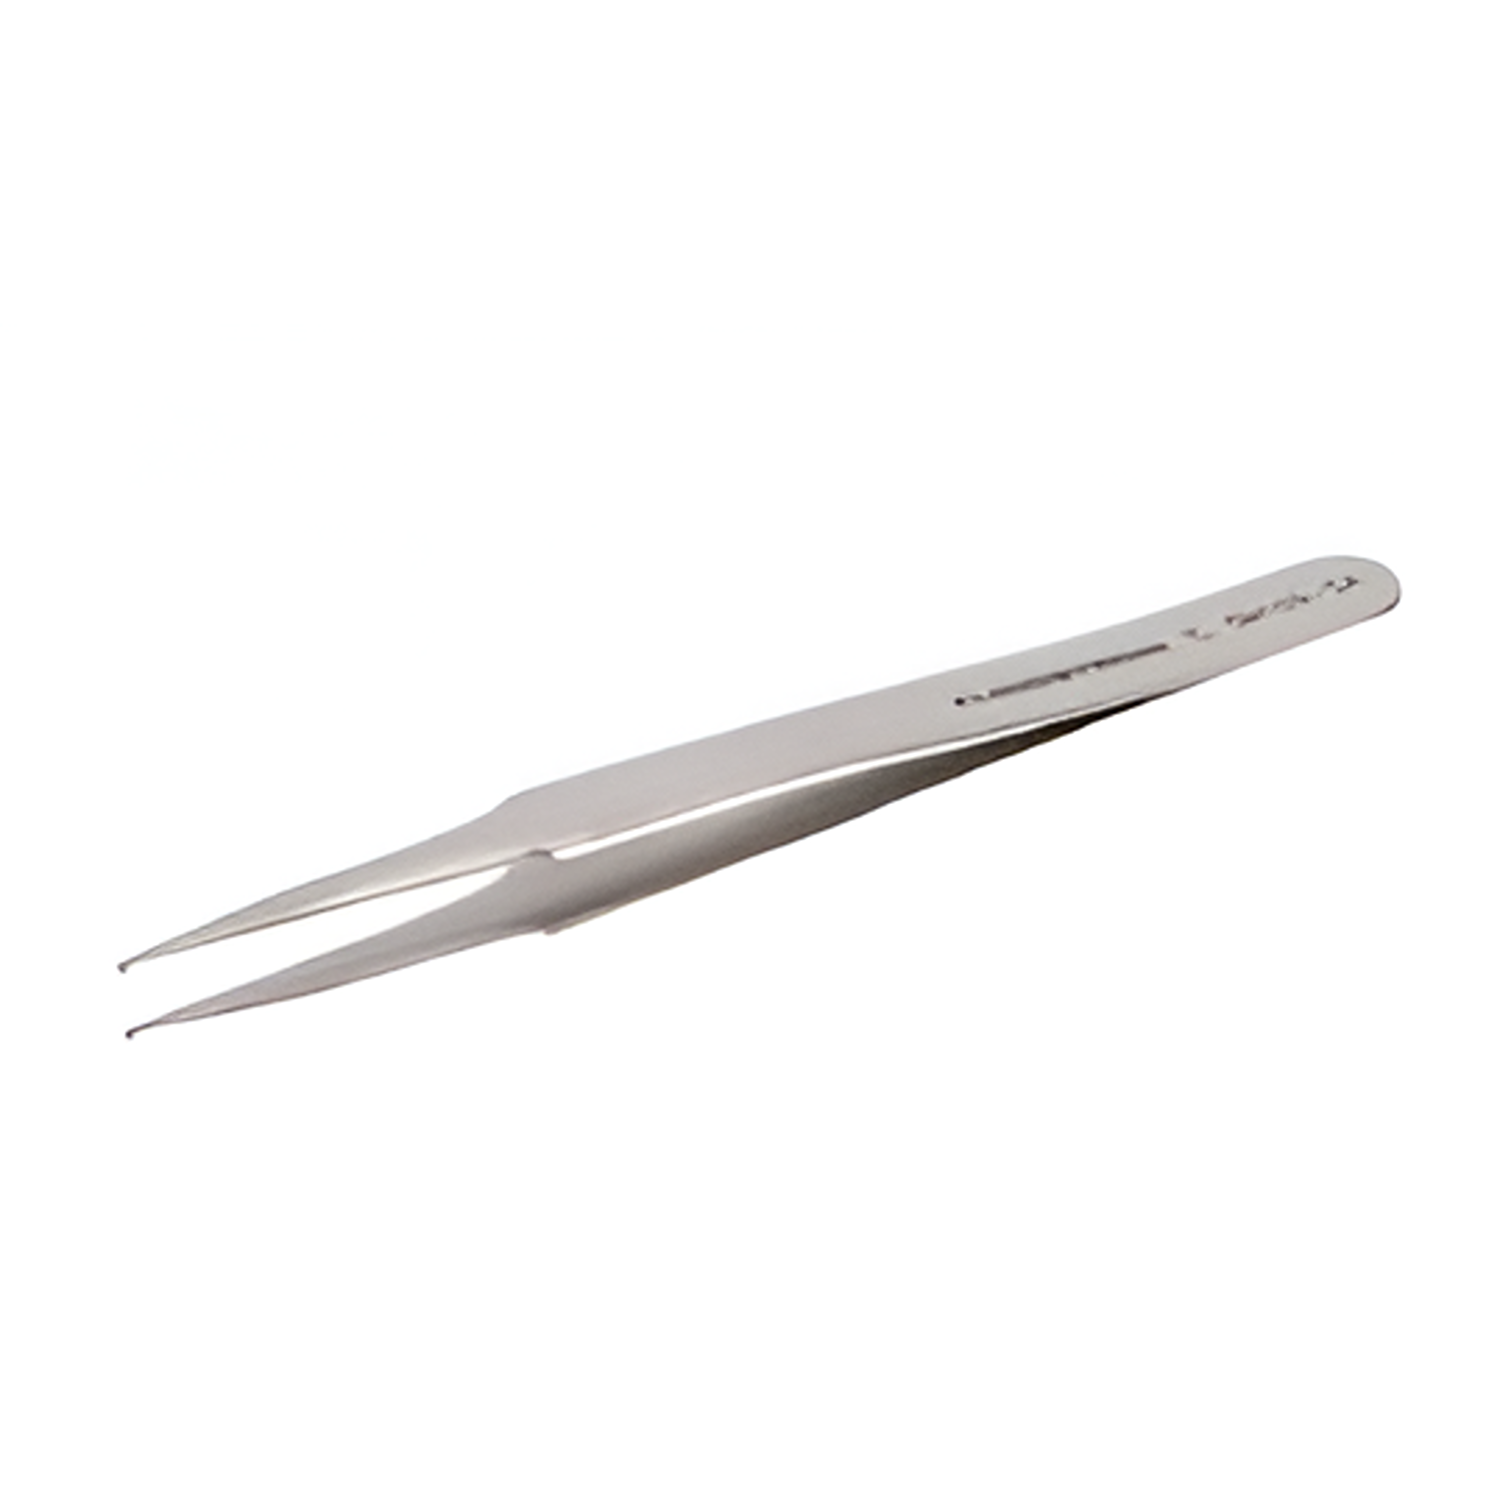 BAHCO TL SM109-SA SMD Tweezers for Soldering 1 mm at 45° Angle - Premium SMD Tweezers from BAHCO - Shop now at Yew Aik.